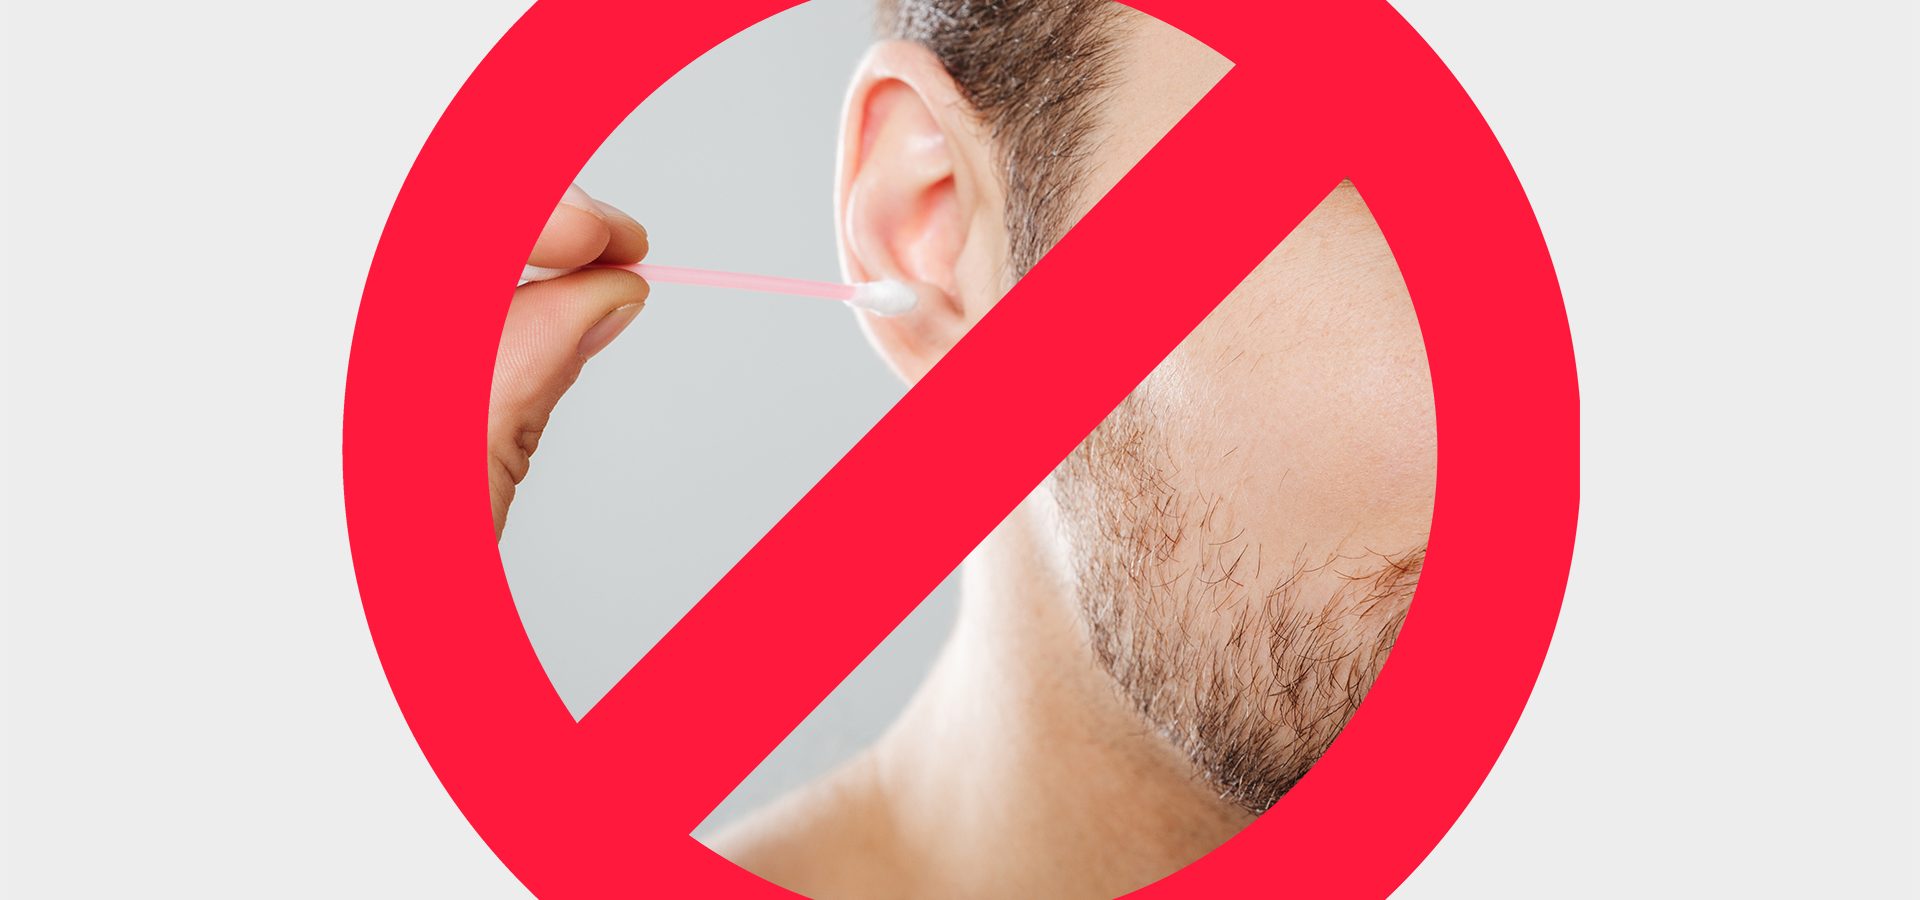 Cleaning ears with cotton swabs is prohibited